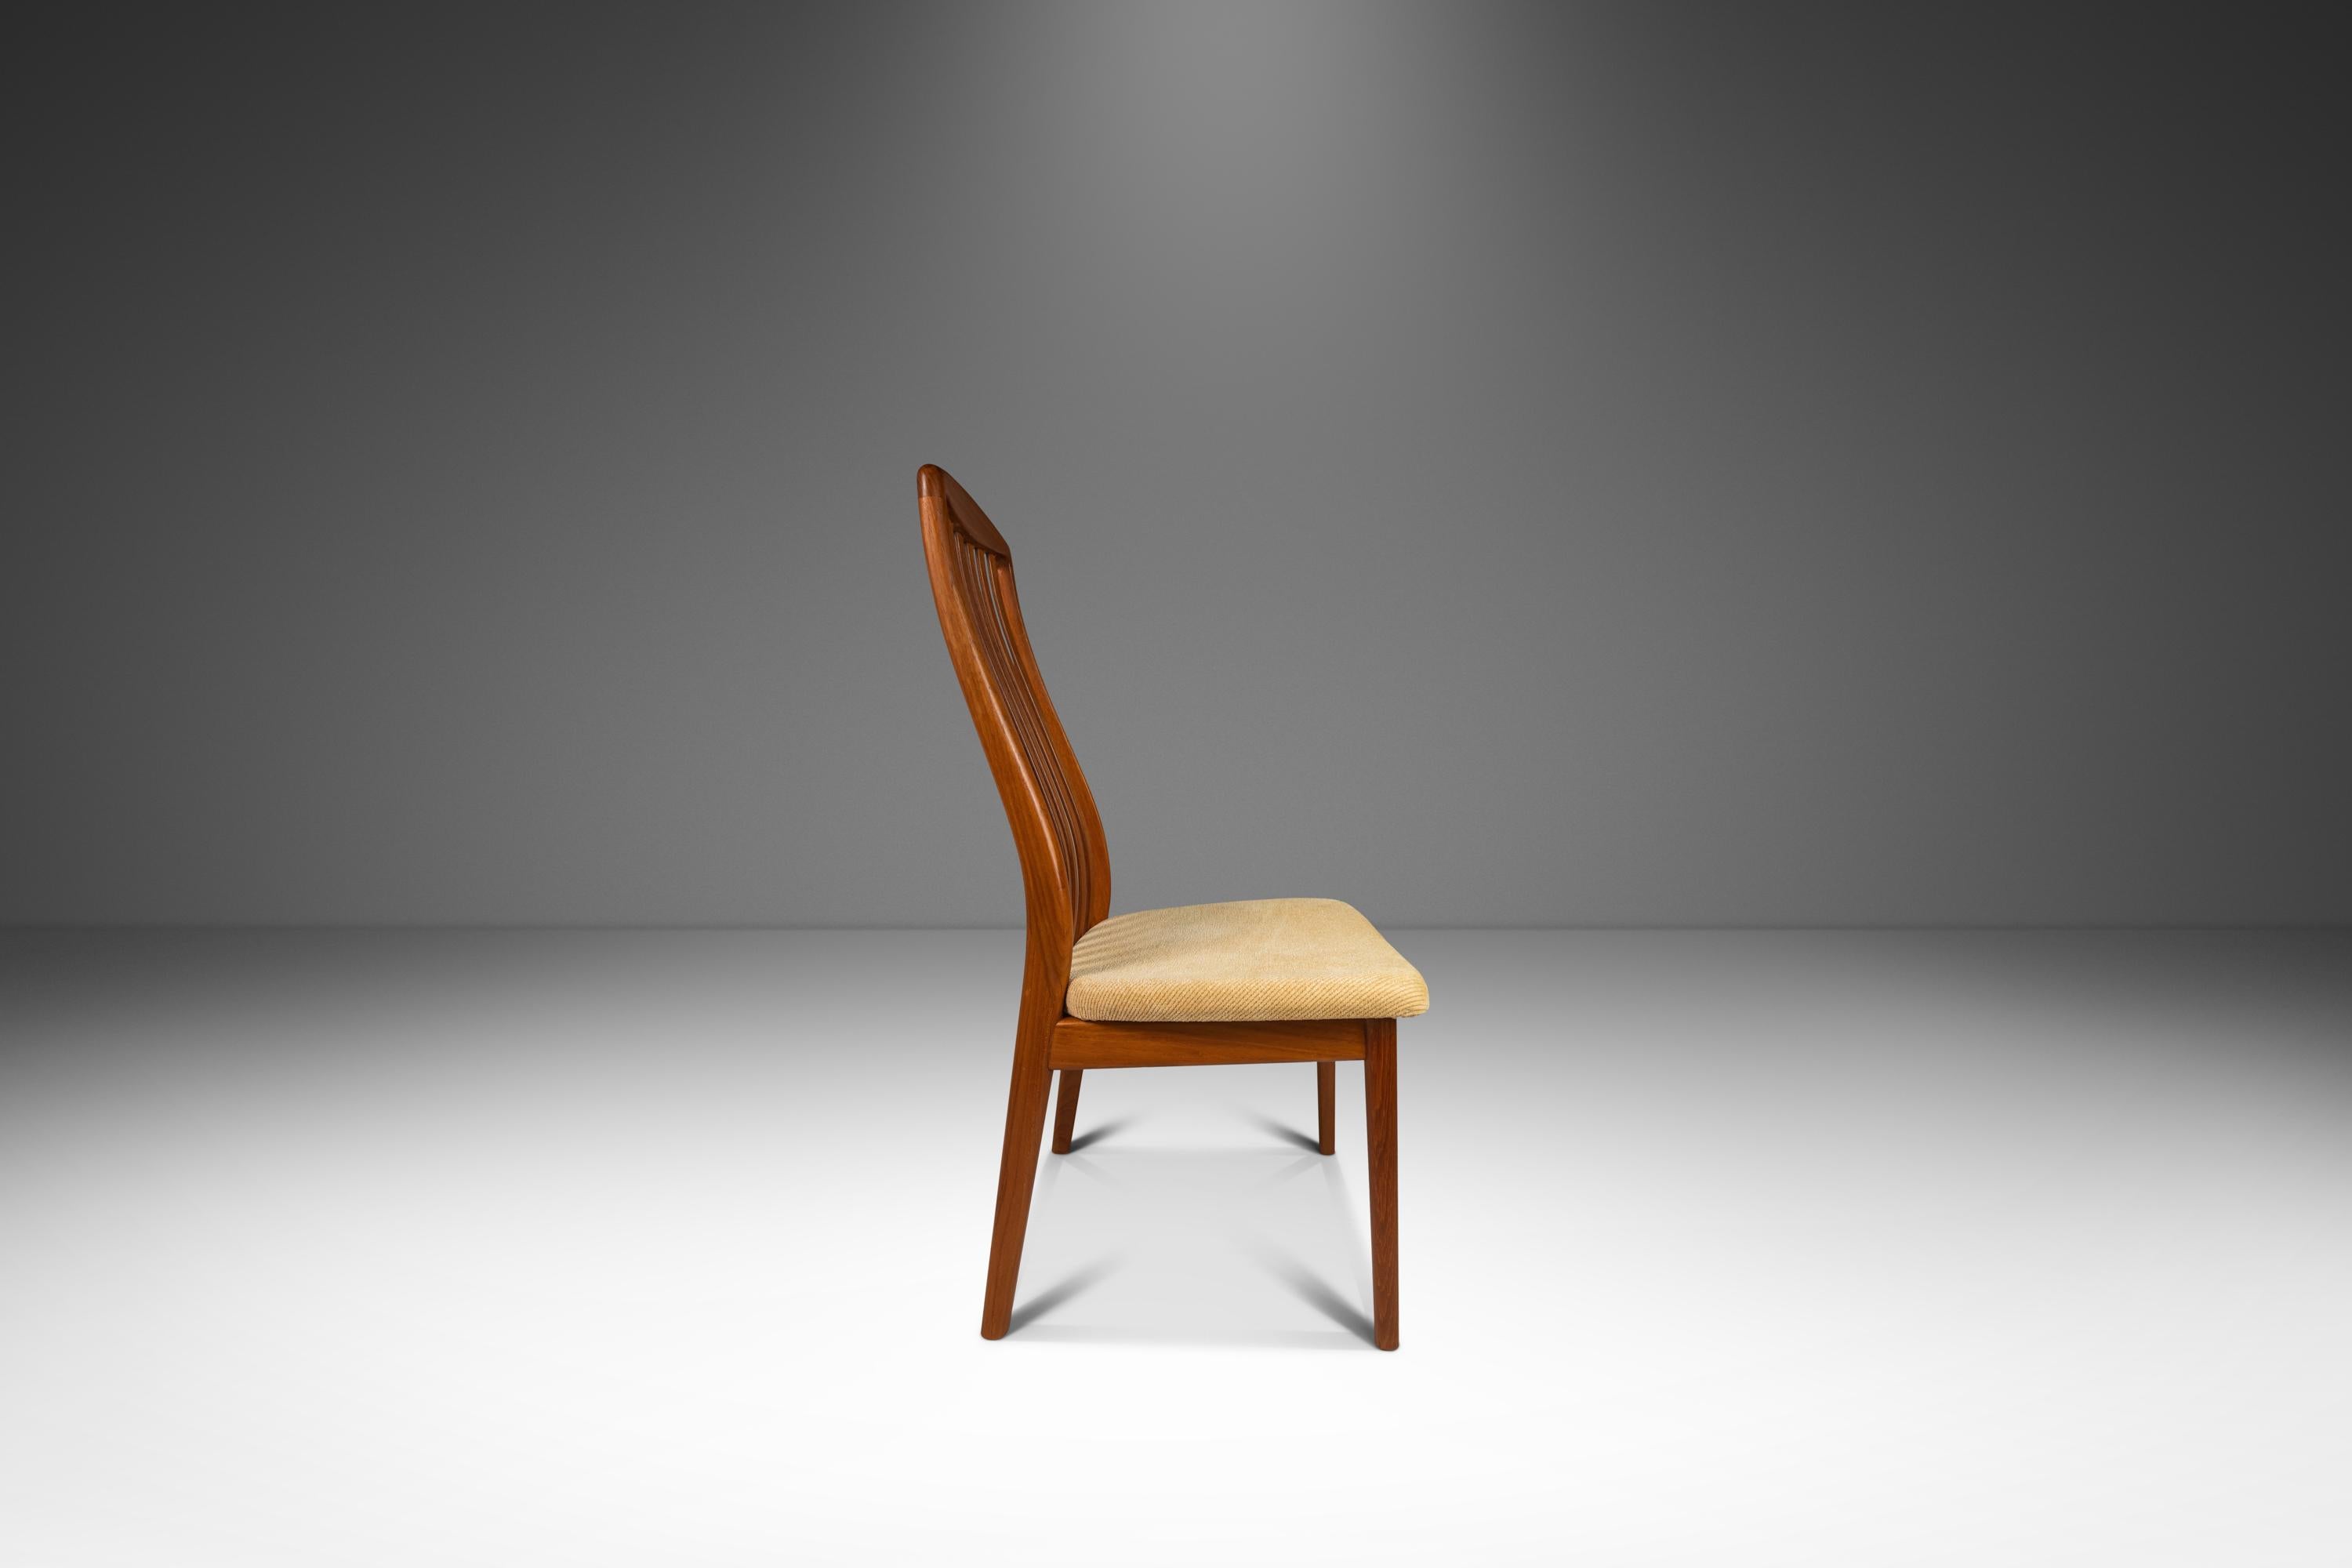 Introducing an absolutely arresting set of dining chairs designed by Preben Schou Andersen for Schou Andersen Møbelfabrik, crafted in the 1970s in Denmark. This stunning set is constructed from solid teak hardwood, showcasing the natural beauty of